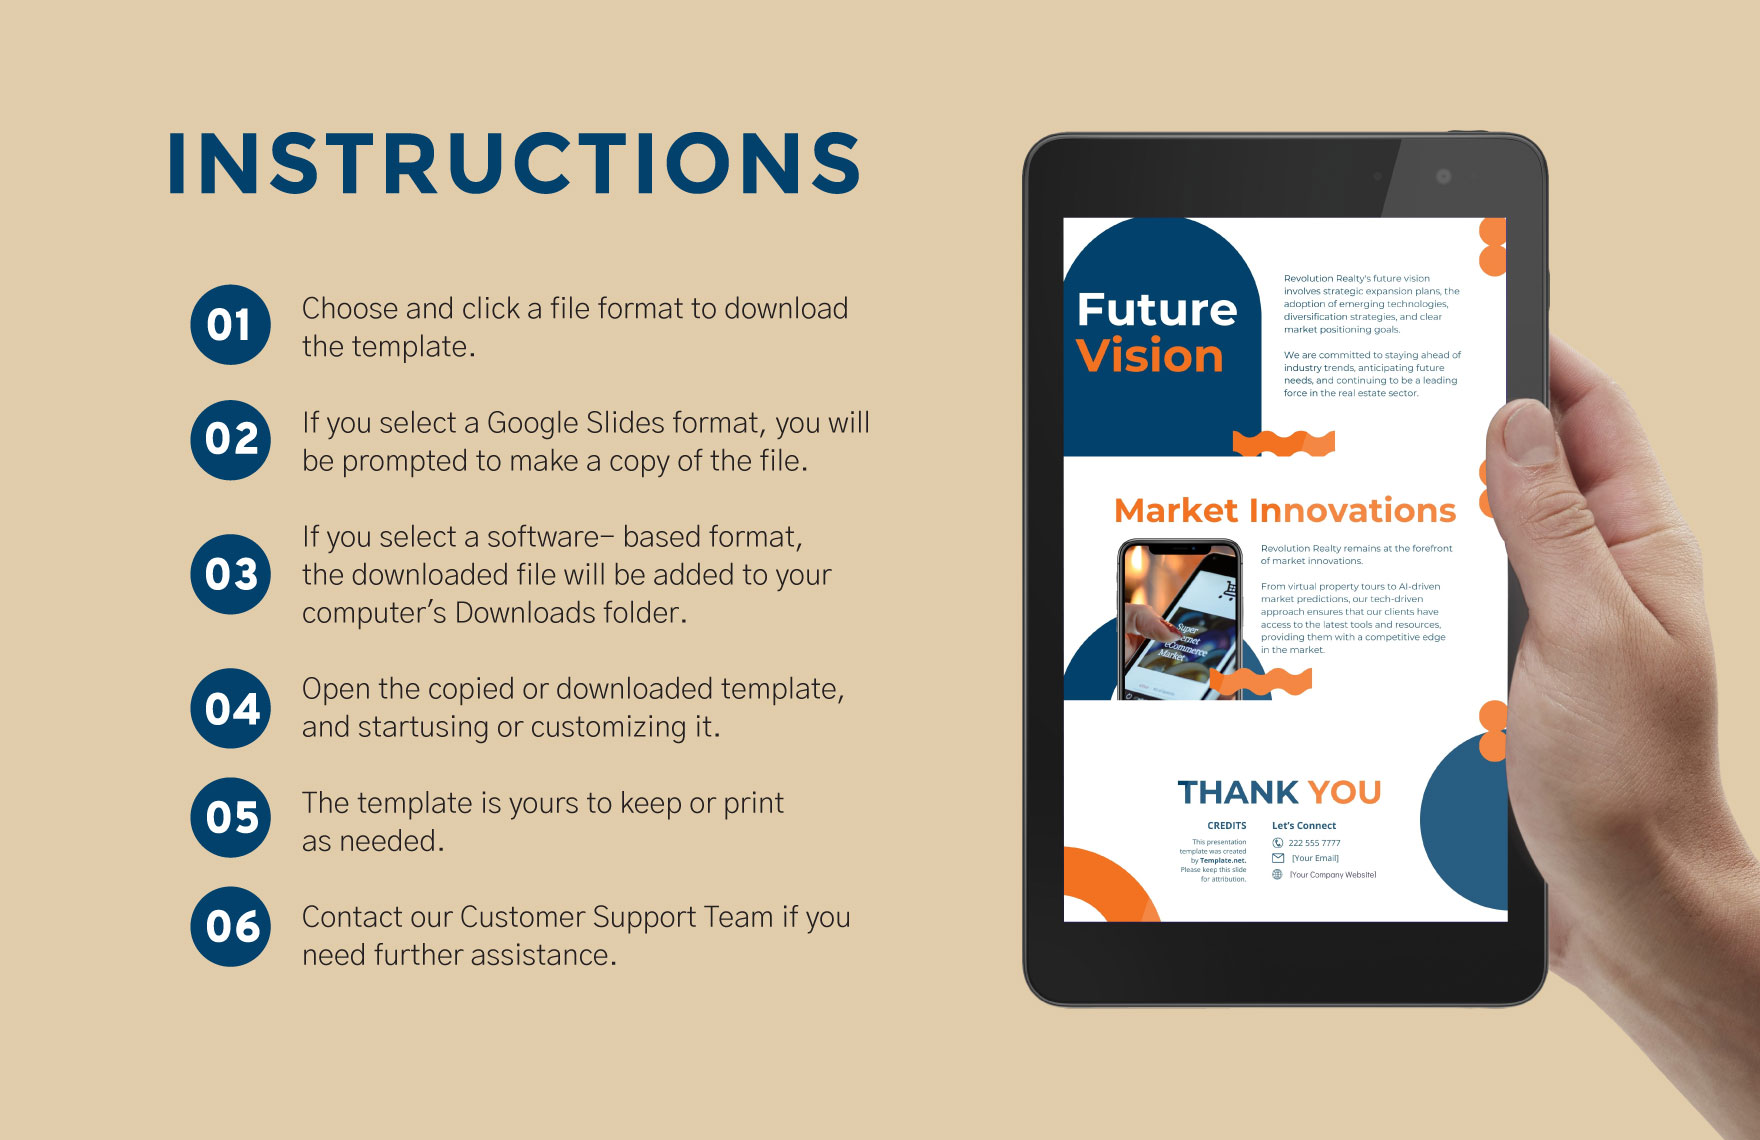 Sales and Business Development Template